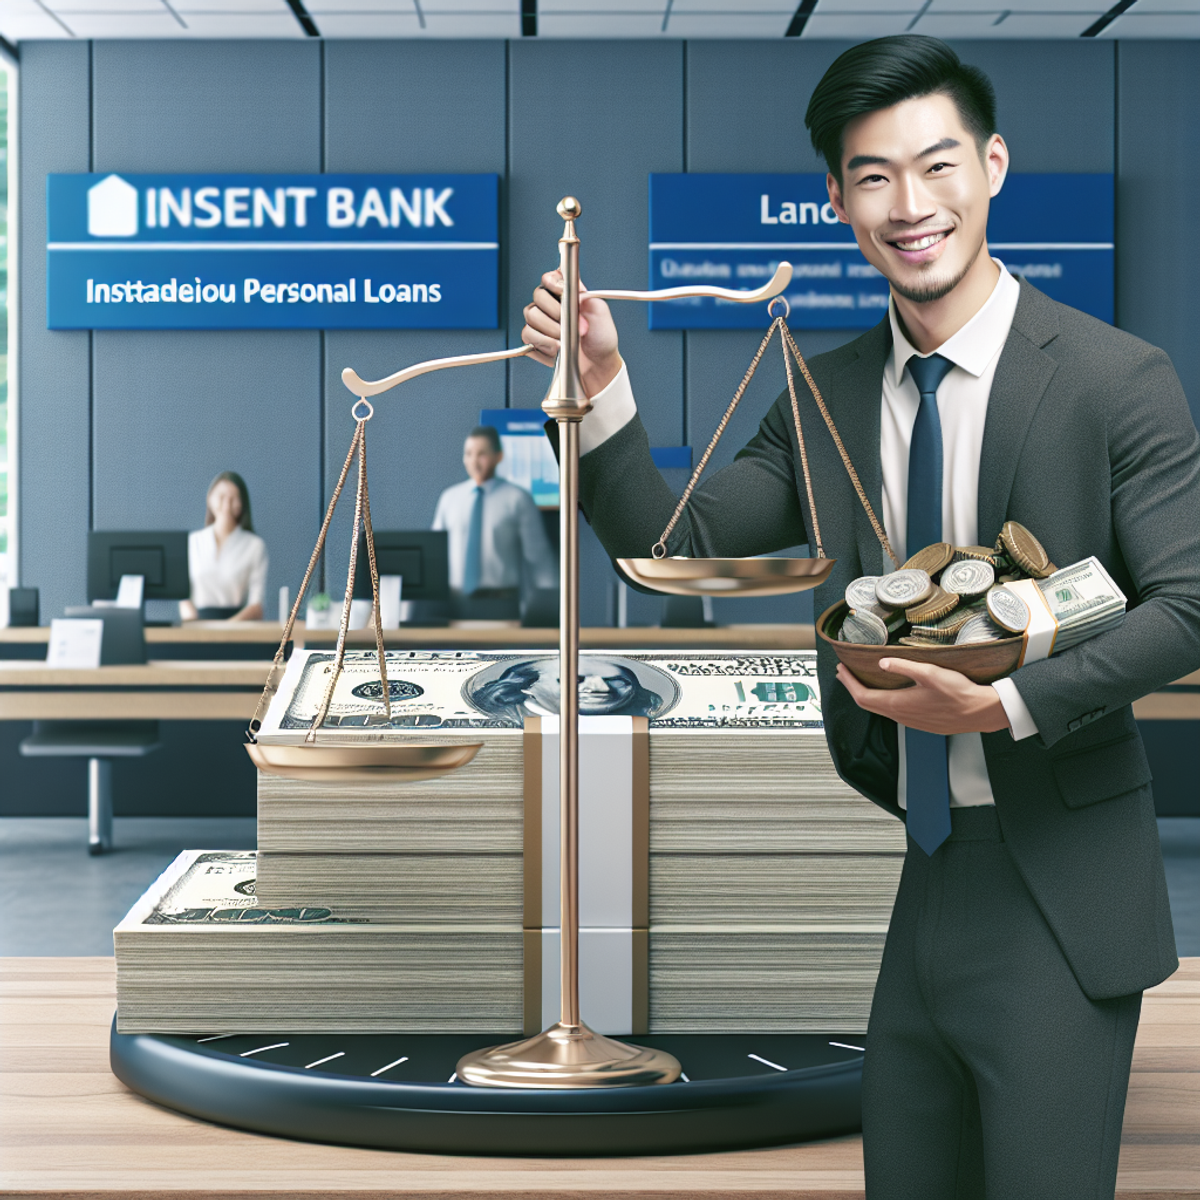 A man of East Asian descent smiles while holding a stack of money in a modern bank, symbolizing the benefits of personal loans.